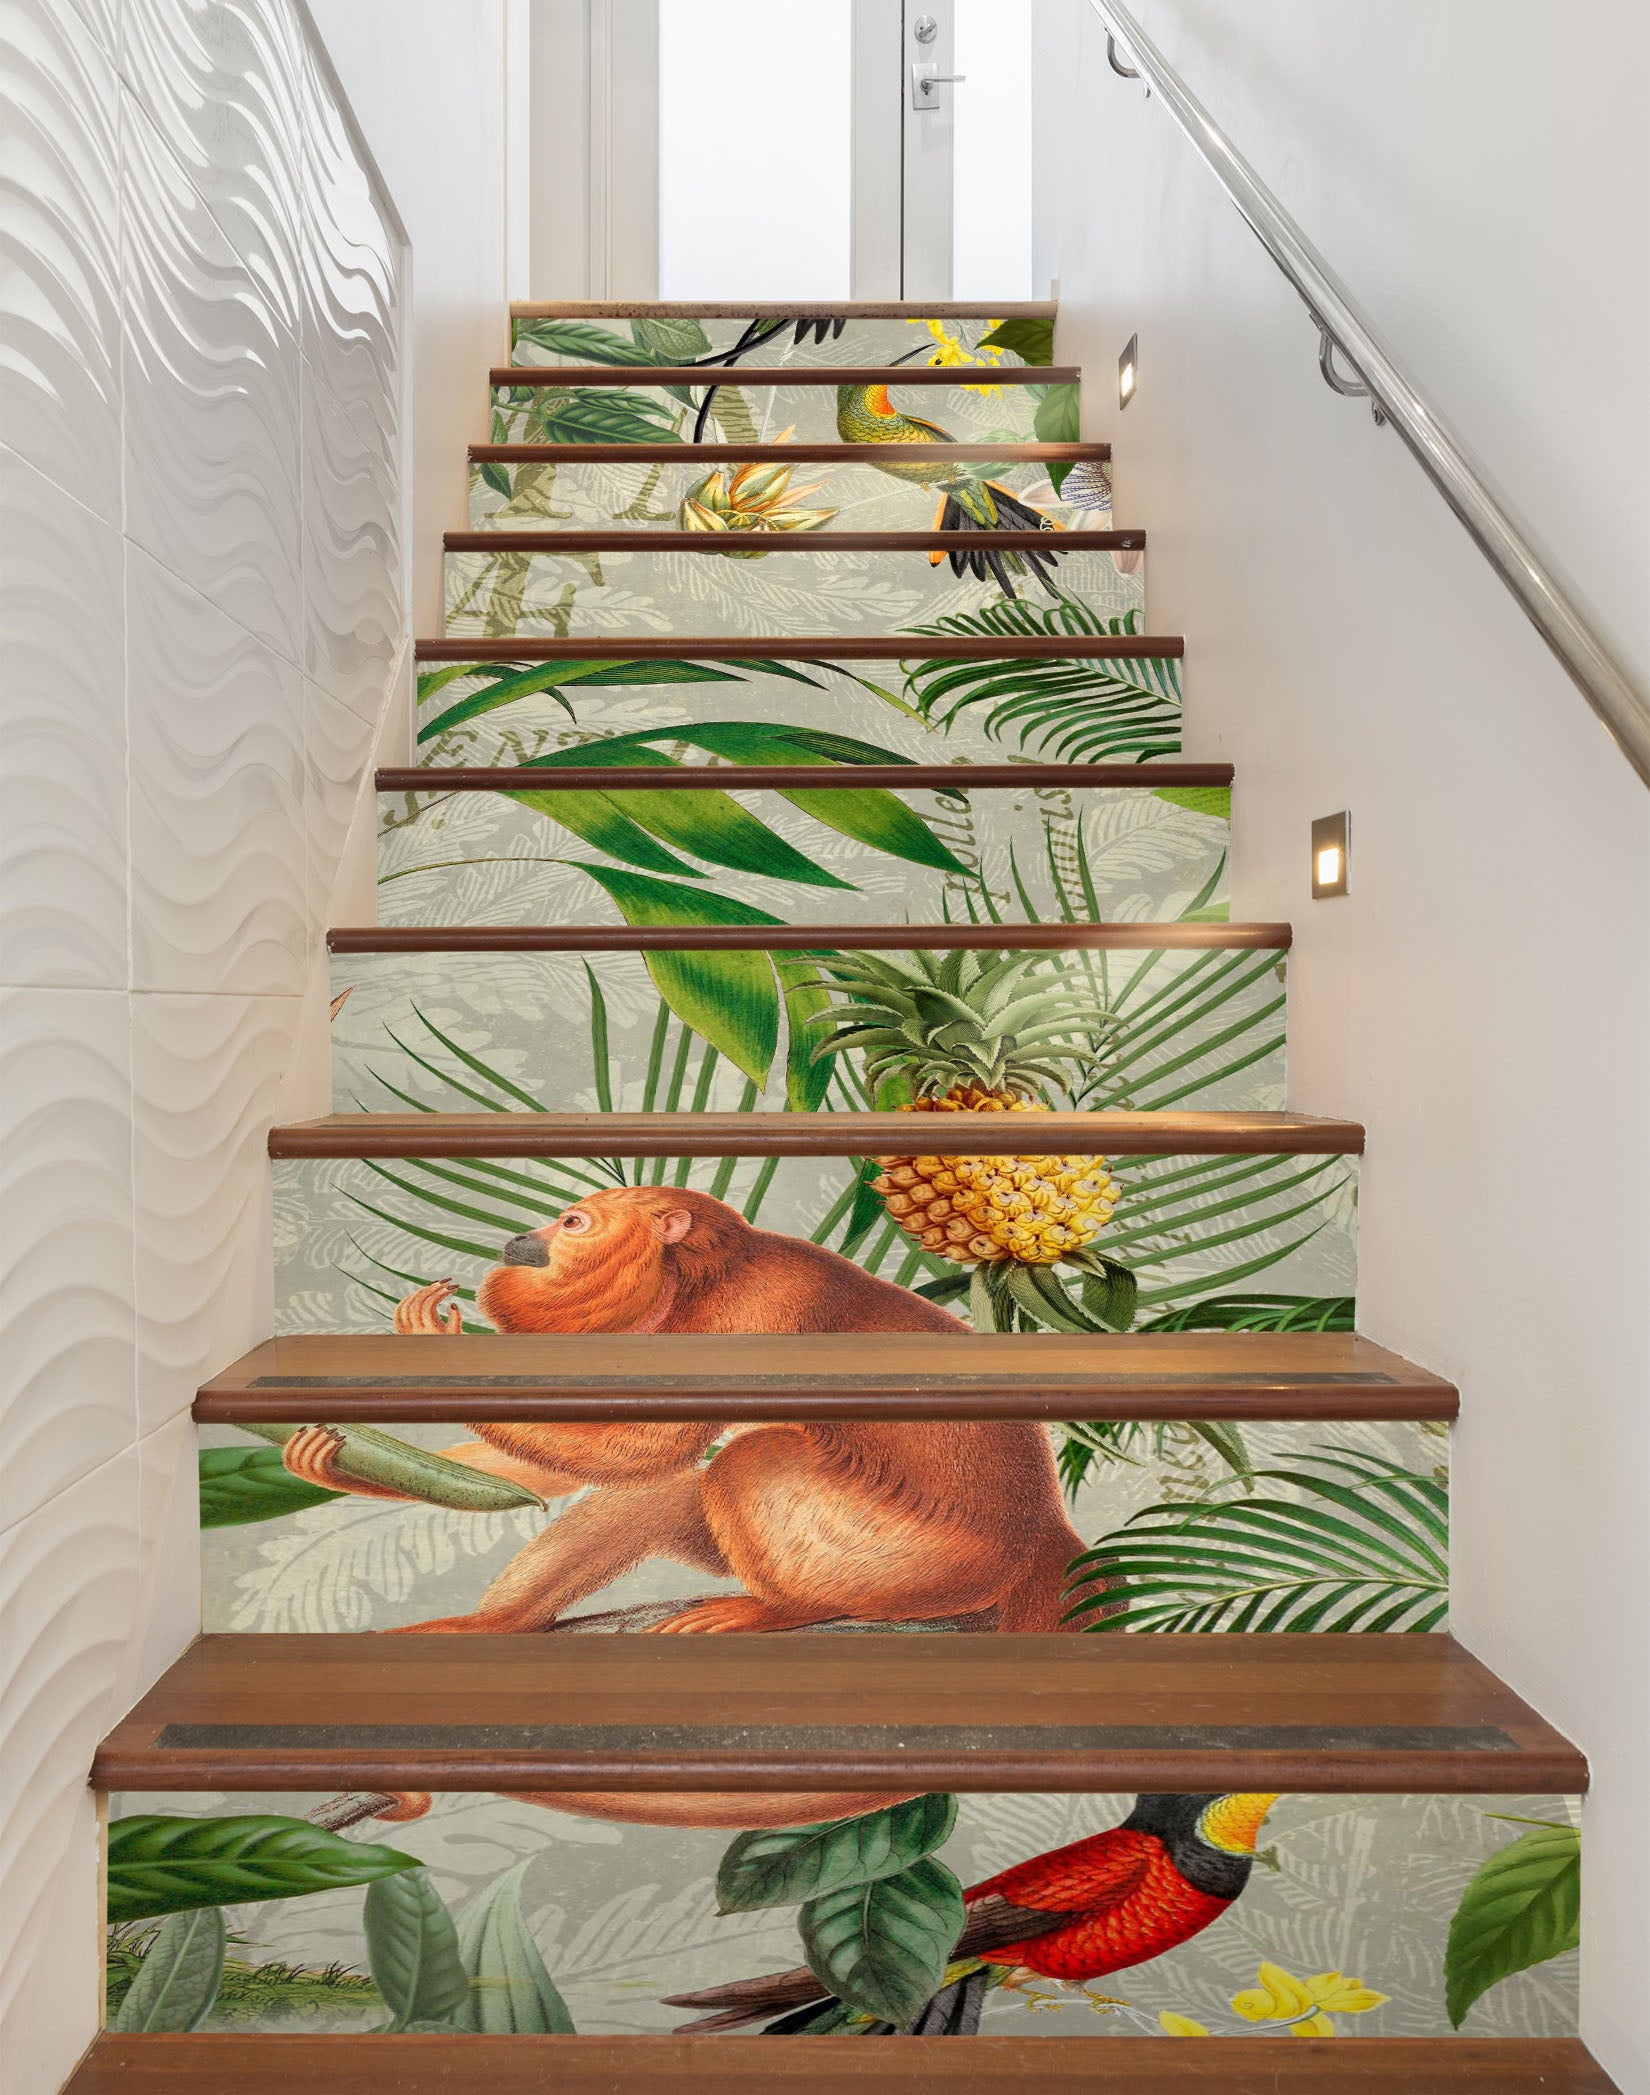 3D Pineapple Monkey 11038 Andrea Haase Stair Risers